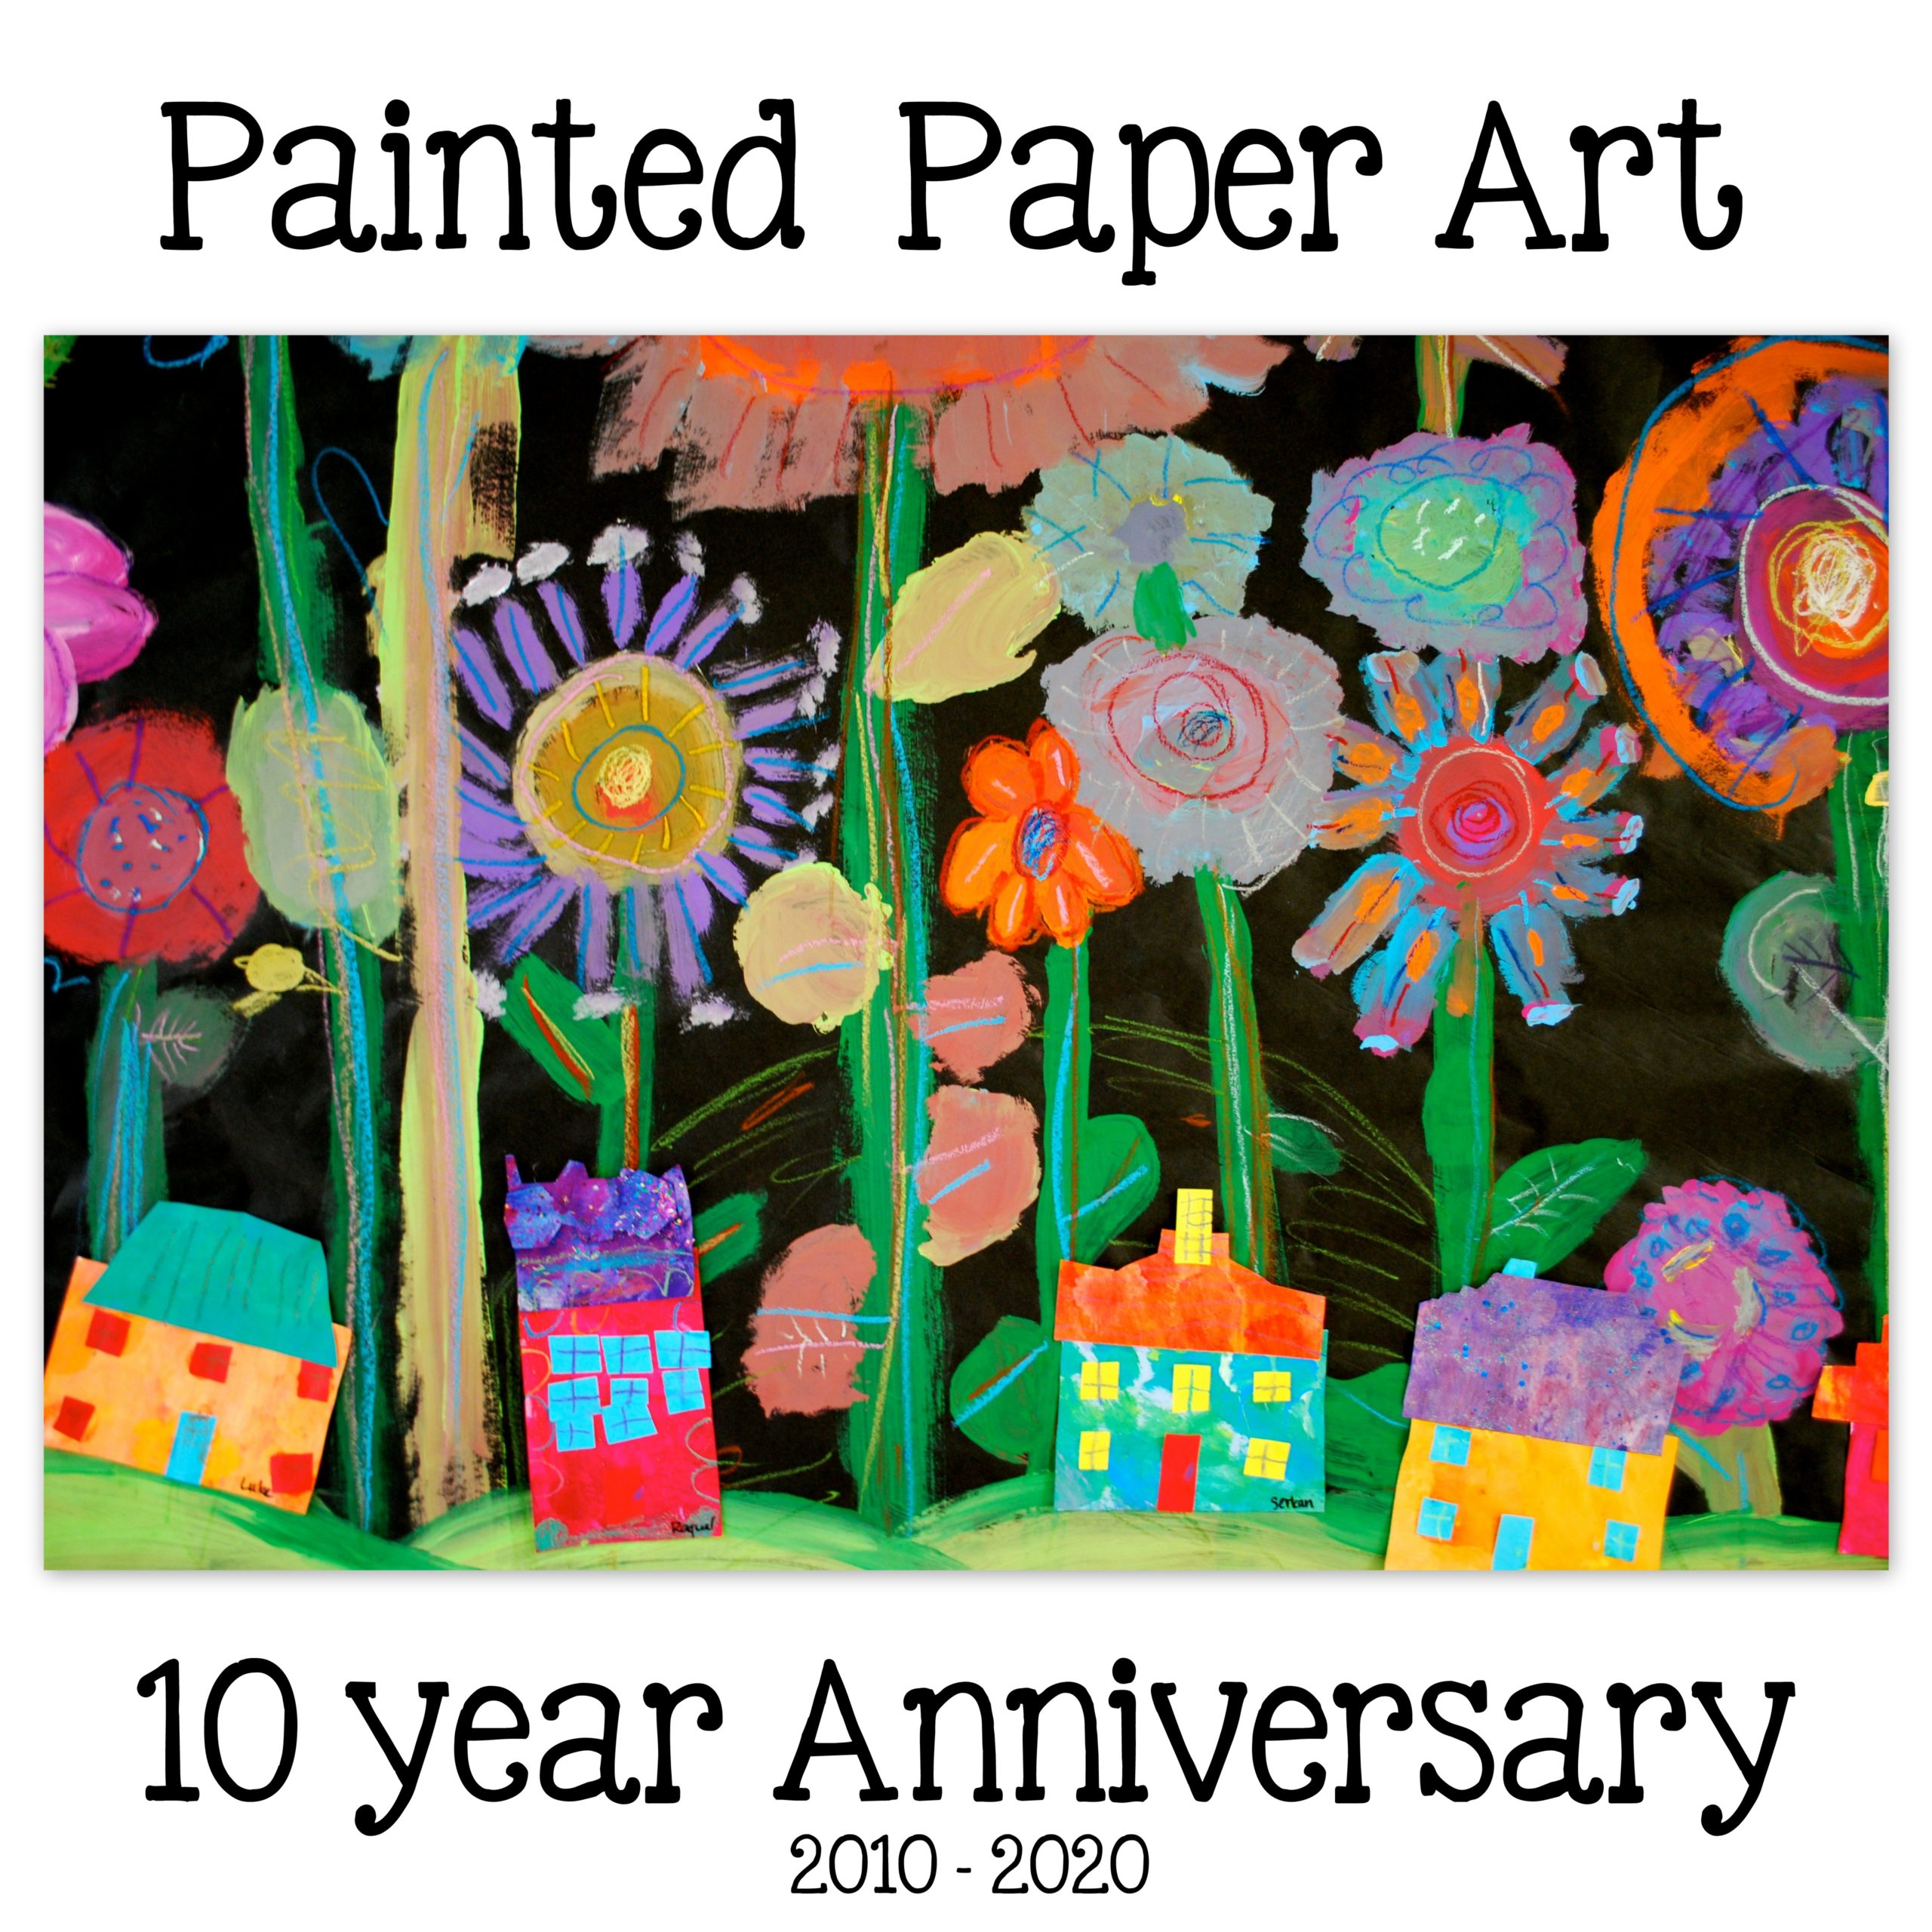 How To Make Painted Papers: The Painted Paper Art Method – Painted